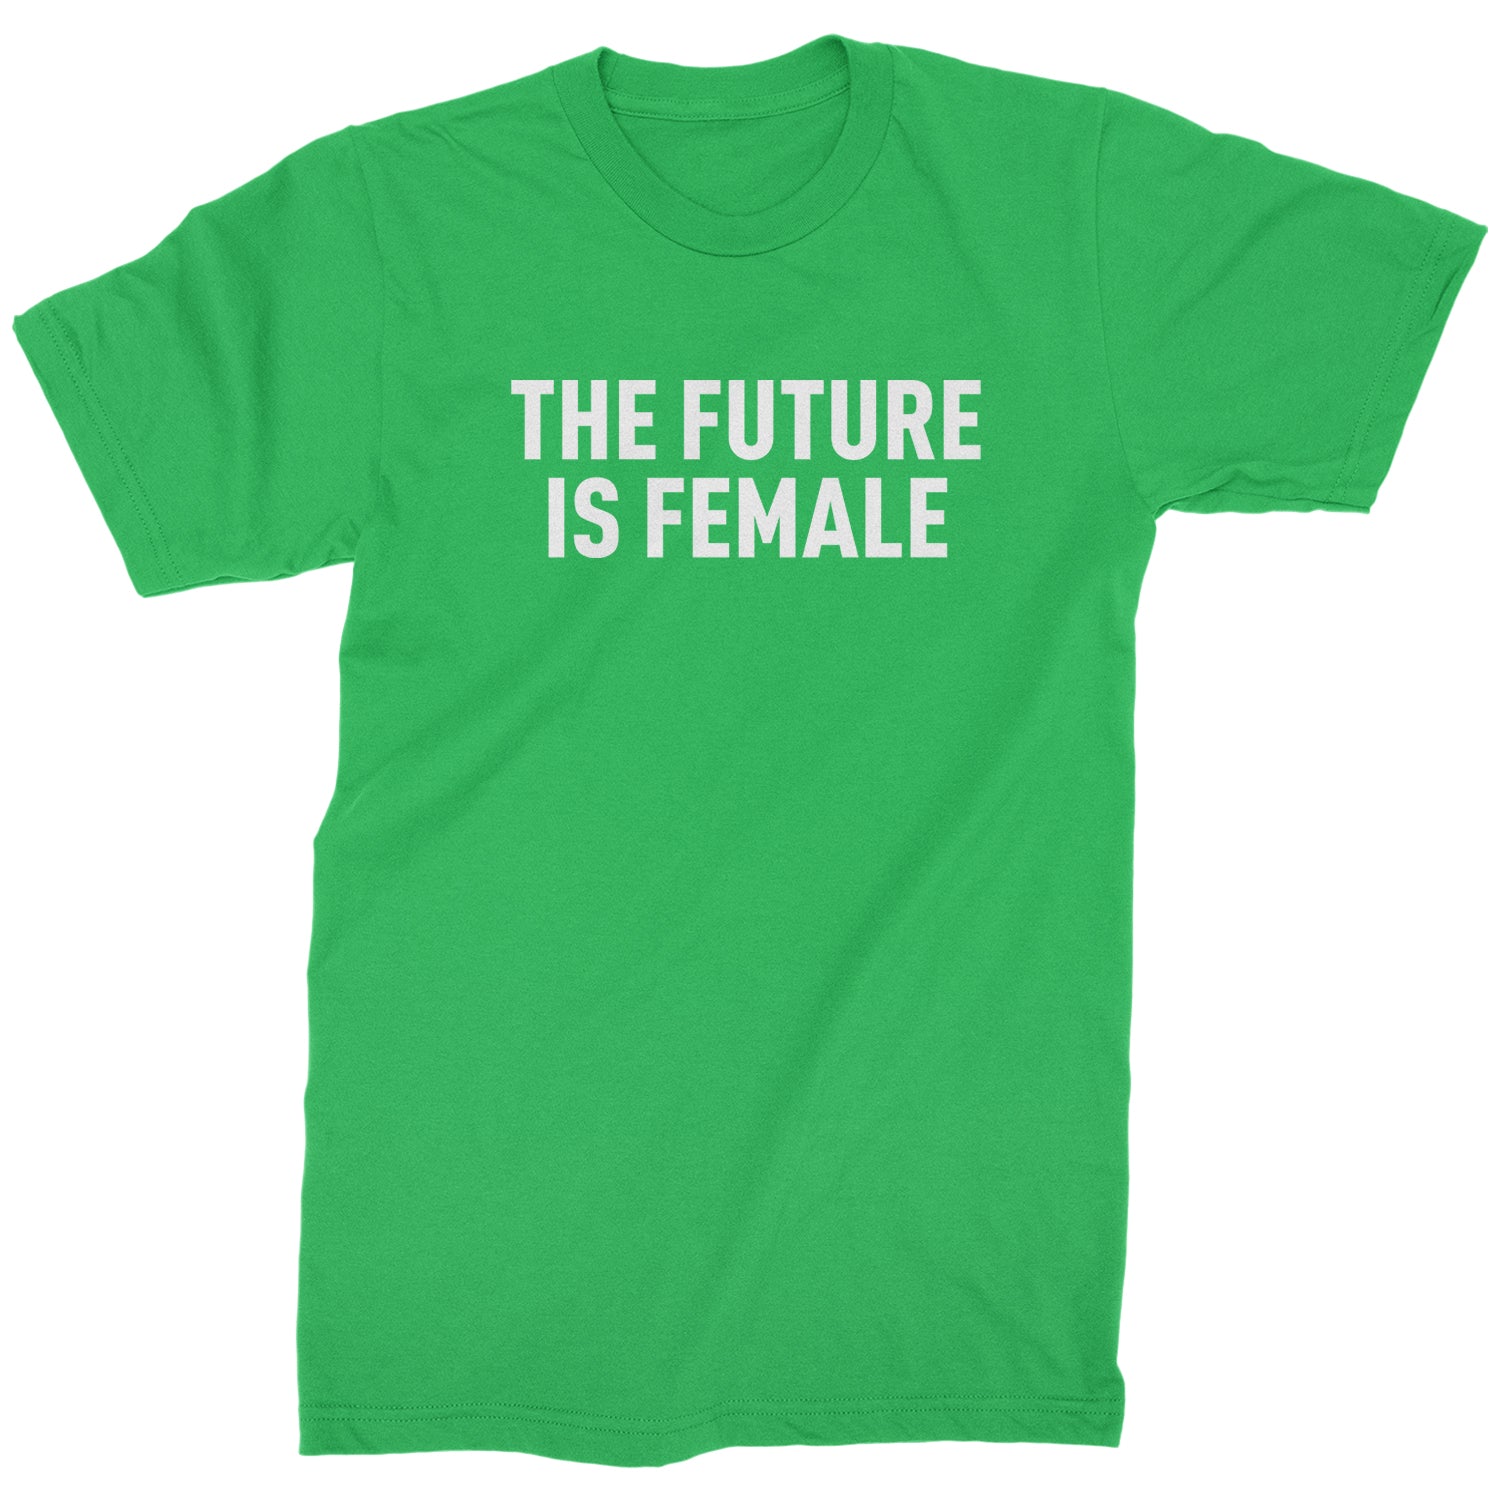 The Future Is Female Feminism Mens T-shirt female, feminism, feminist, femme, future, is, liberation, suffrage, the by Expression Tees